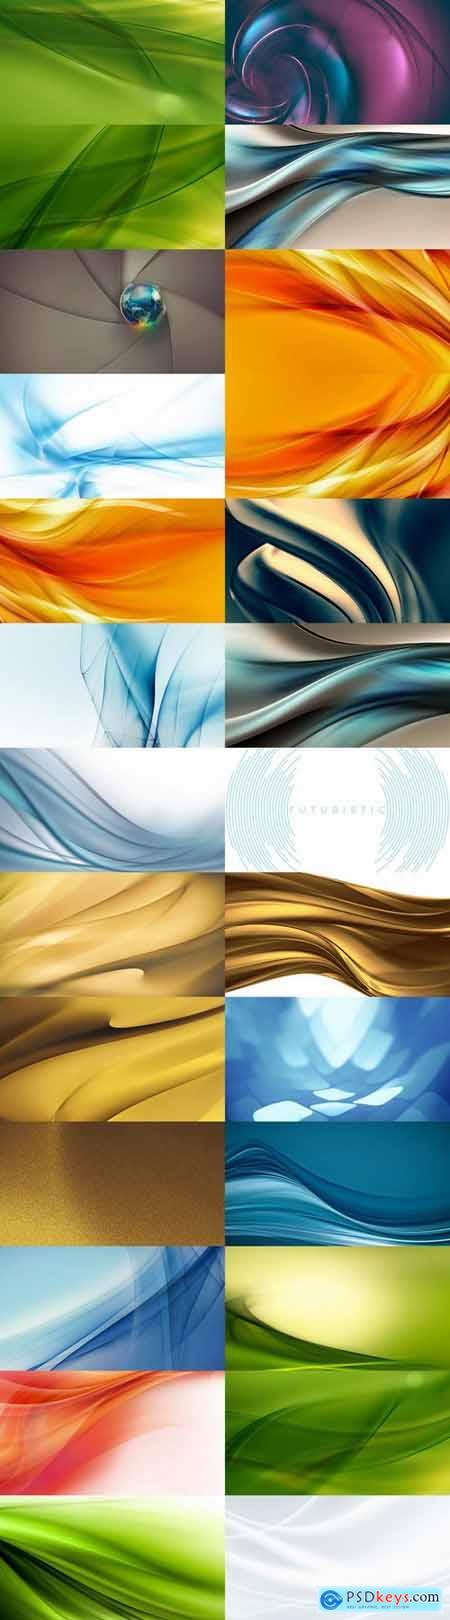 Abstract Backgrounds Bundle 5